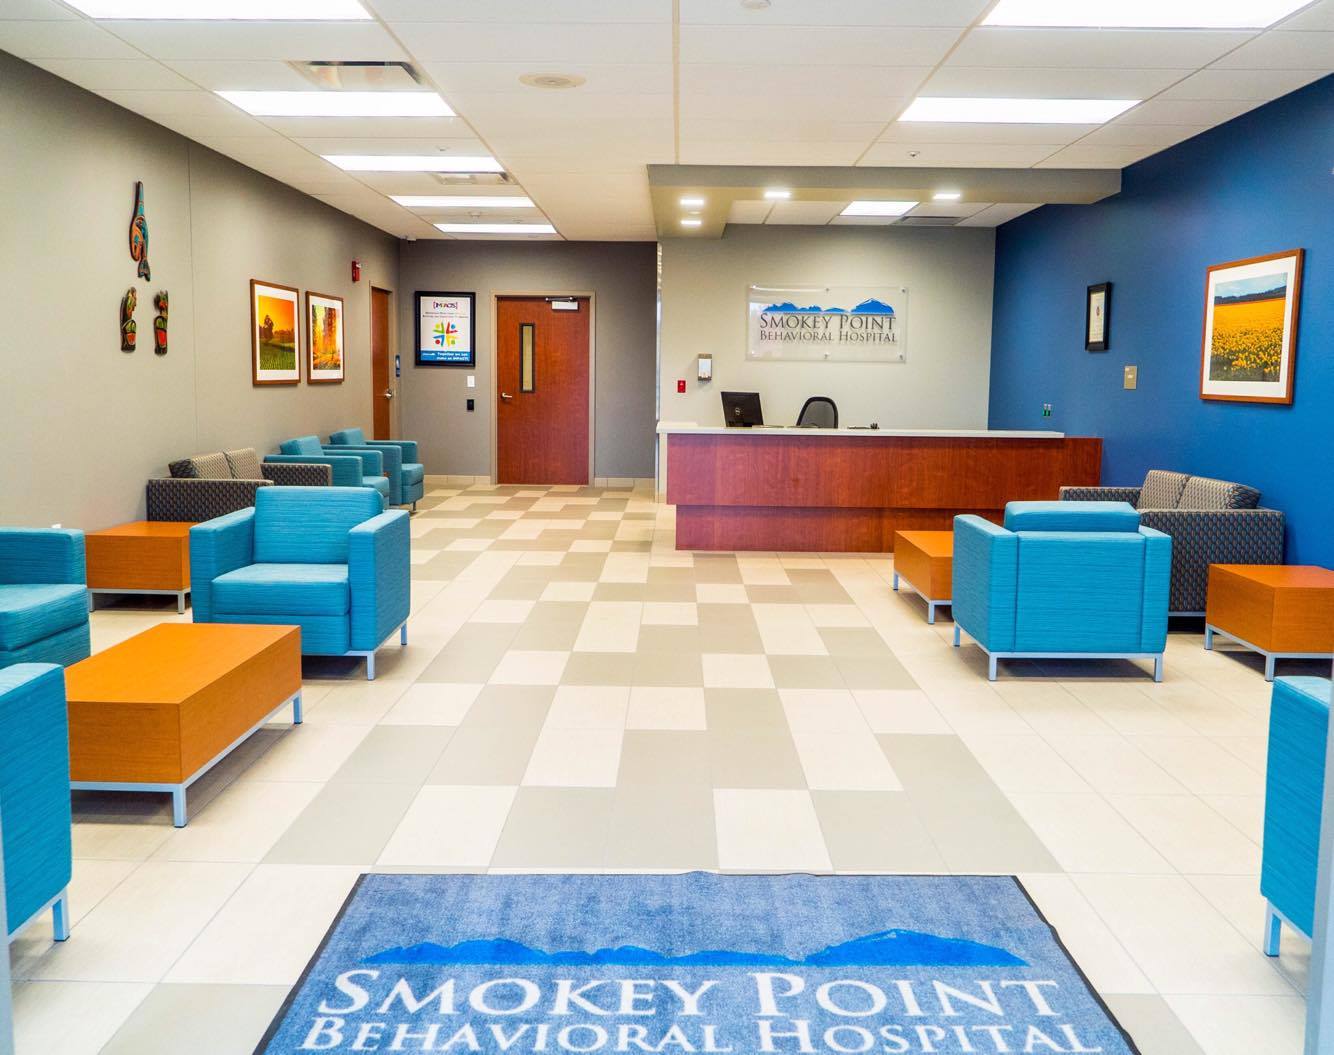 Lobby Main Entrance View for Smokey Point